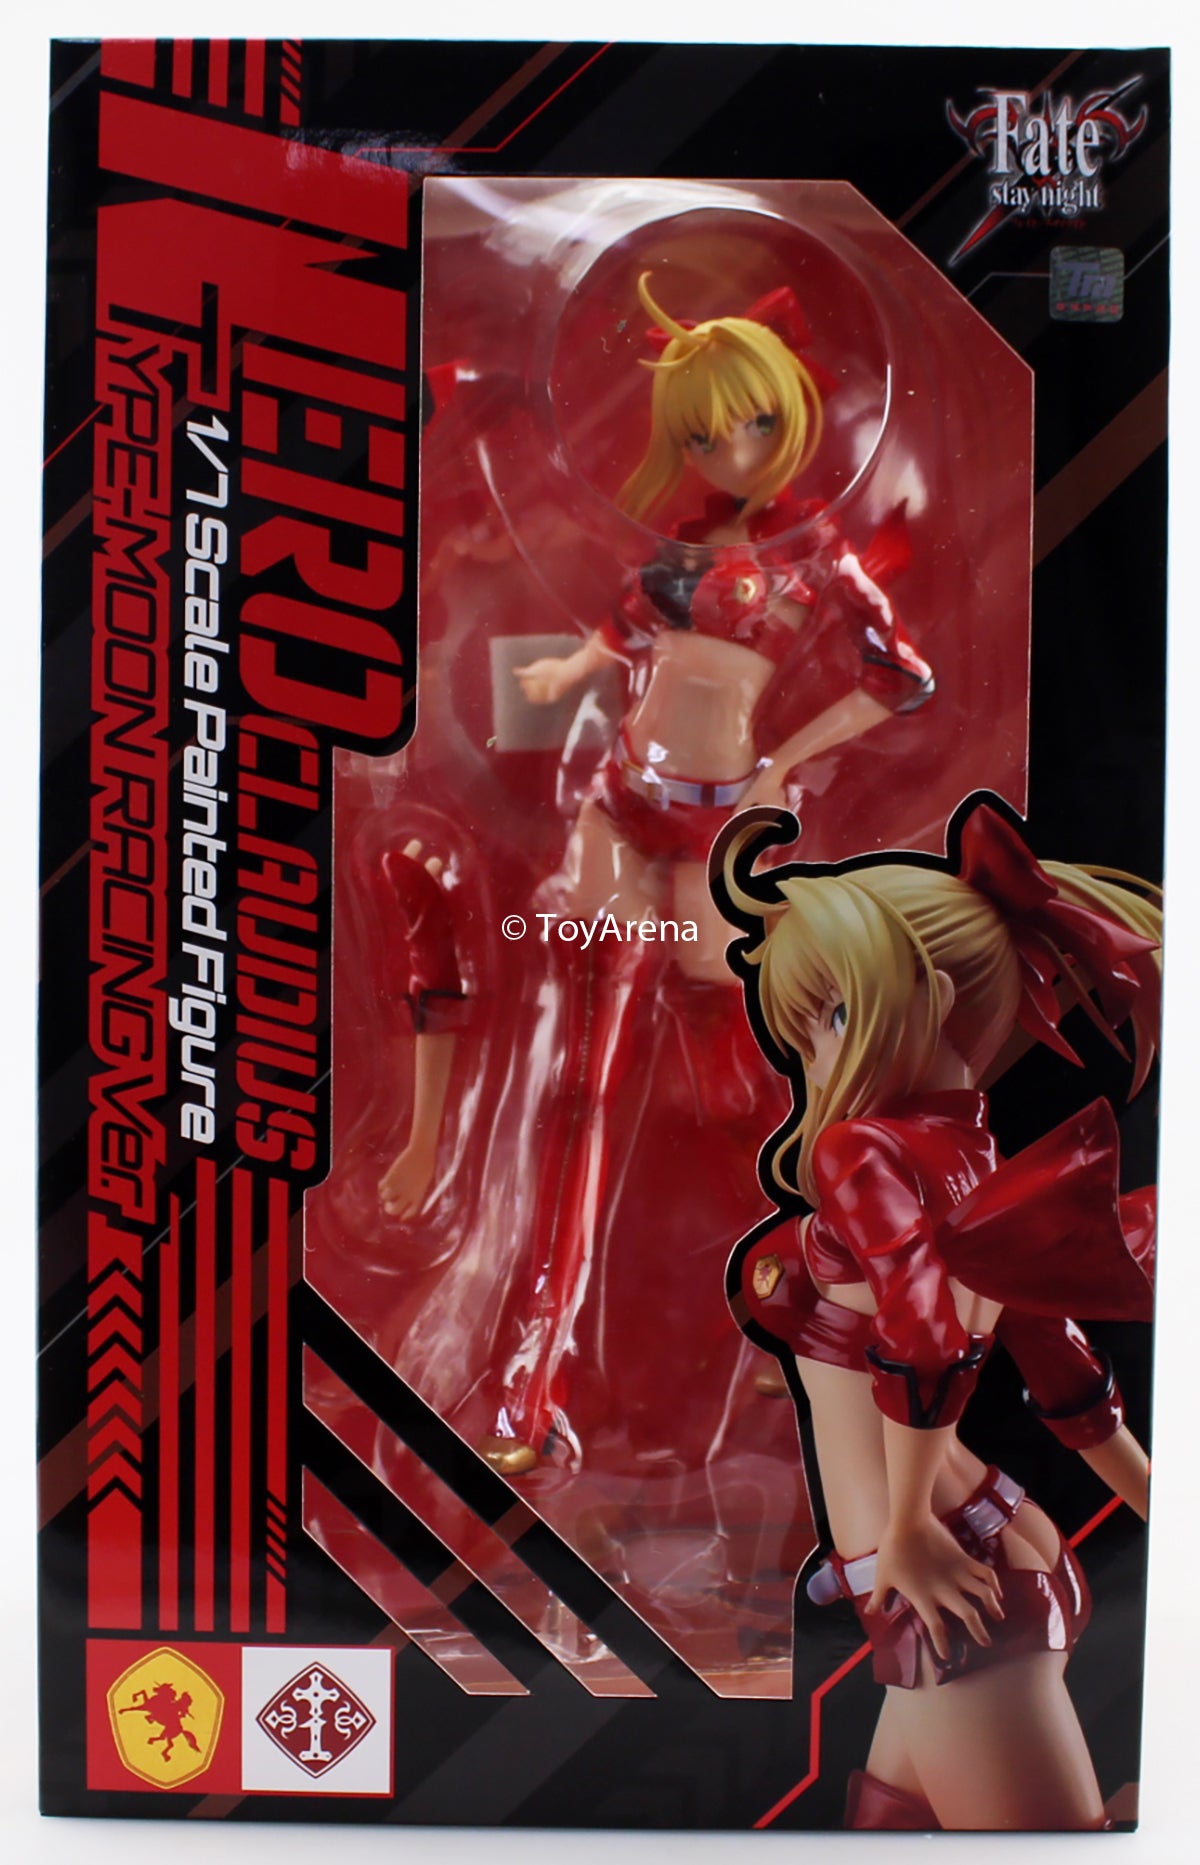 Stronger 1/7 Fate/ Stay Night Saber/ Nero Claudius: Type Moon Racing Ver PVC Scale Statue Figure